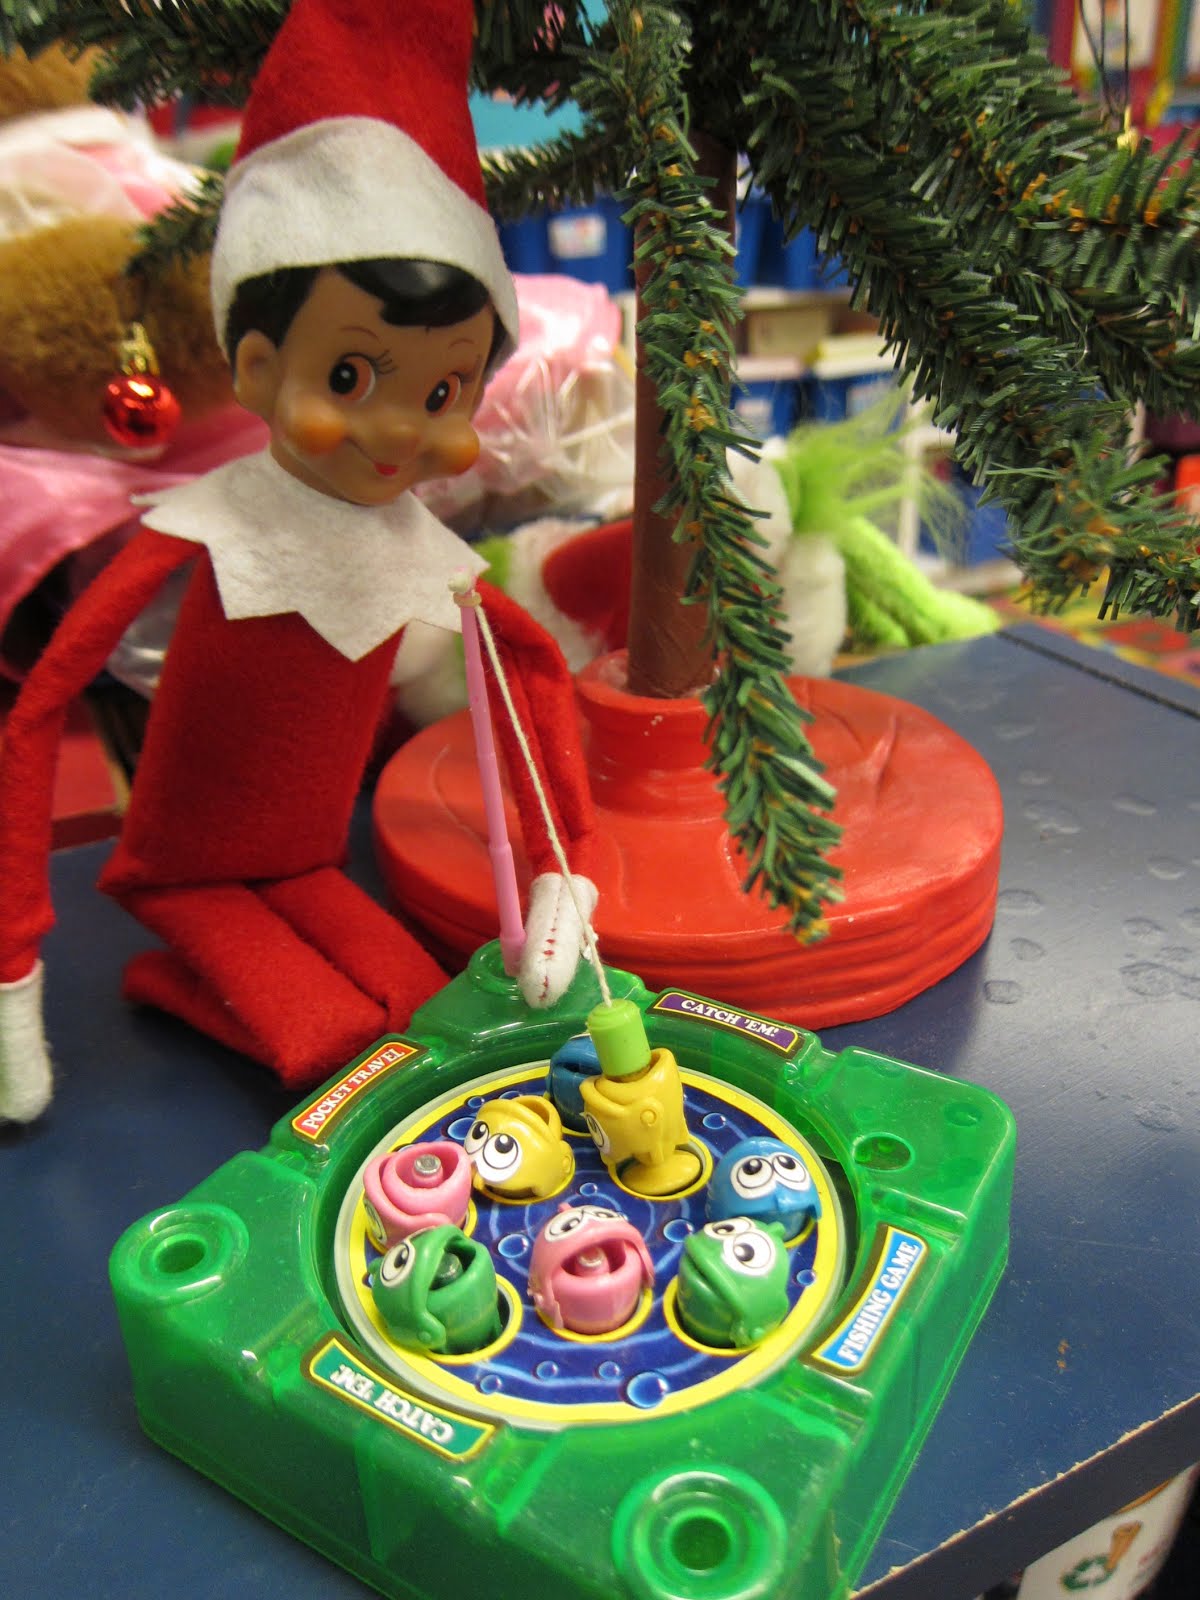 Seusstastic Classroom Inspirations: Elf on the Shelf, Gifts, & More!